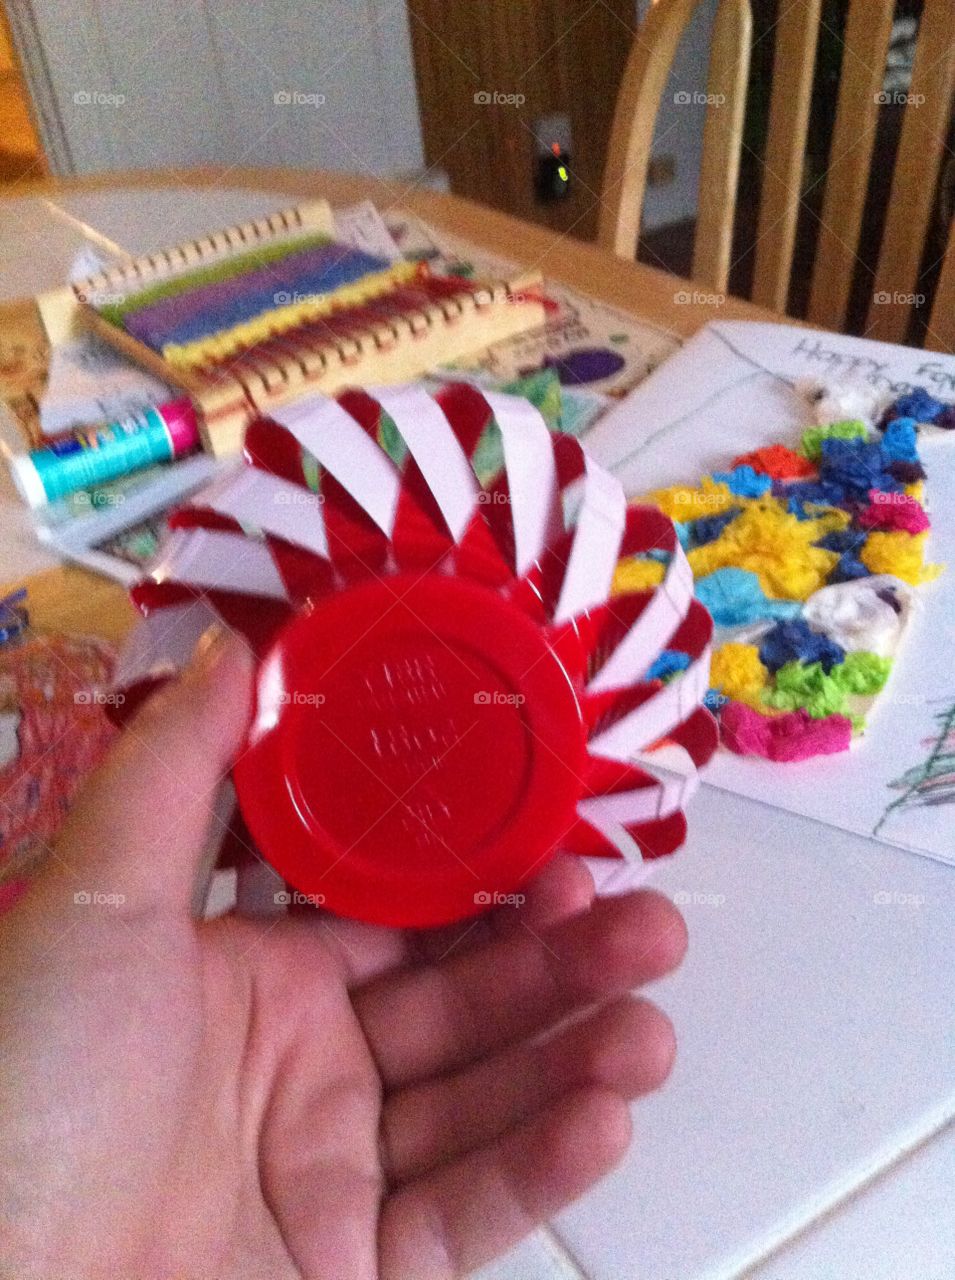 Cut up and folded red Solo cup for arts and crafts time 